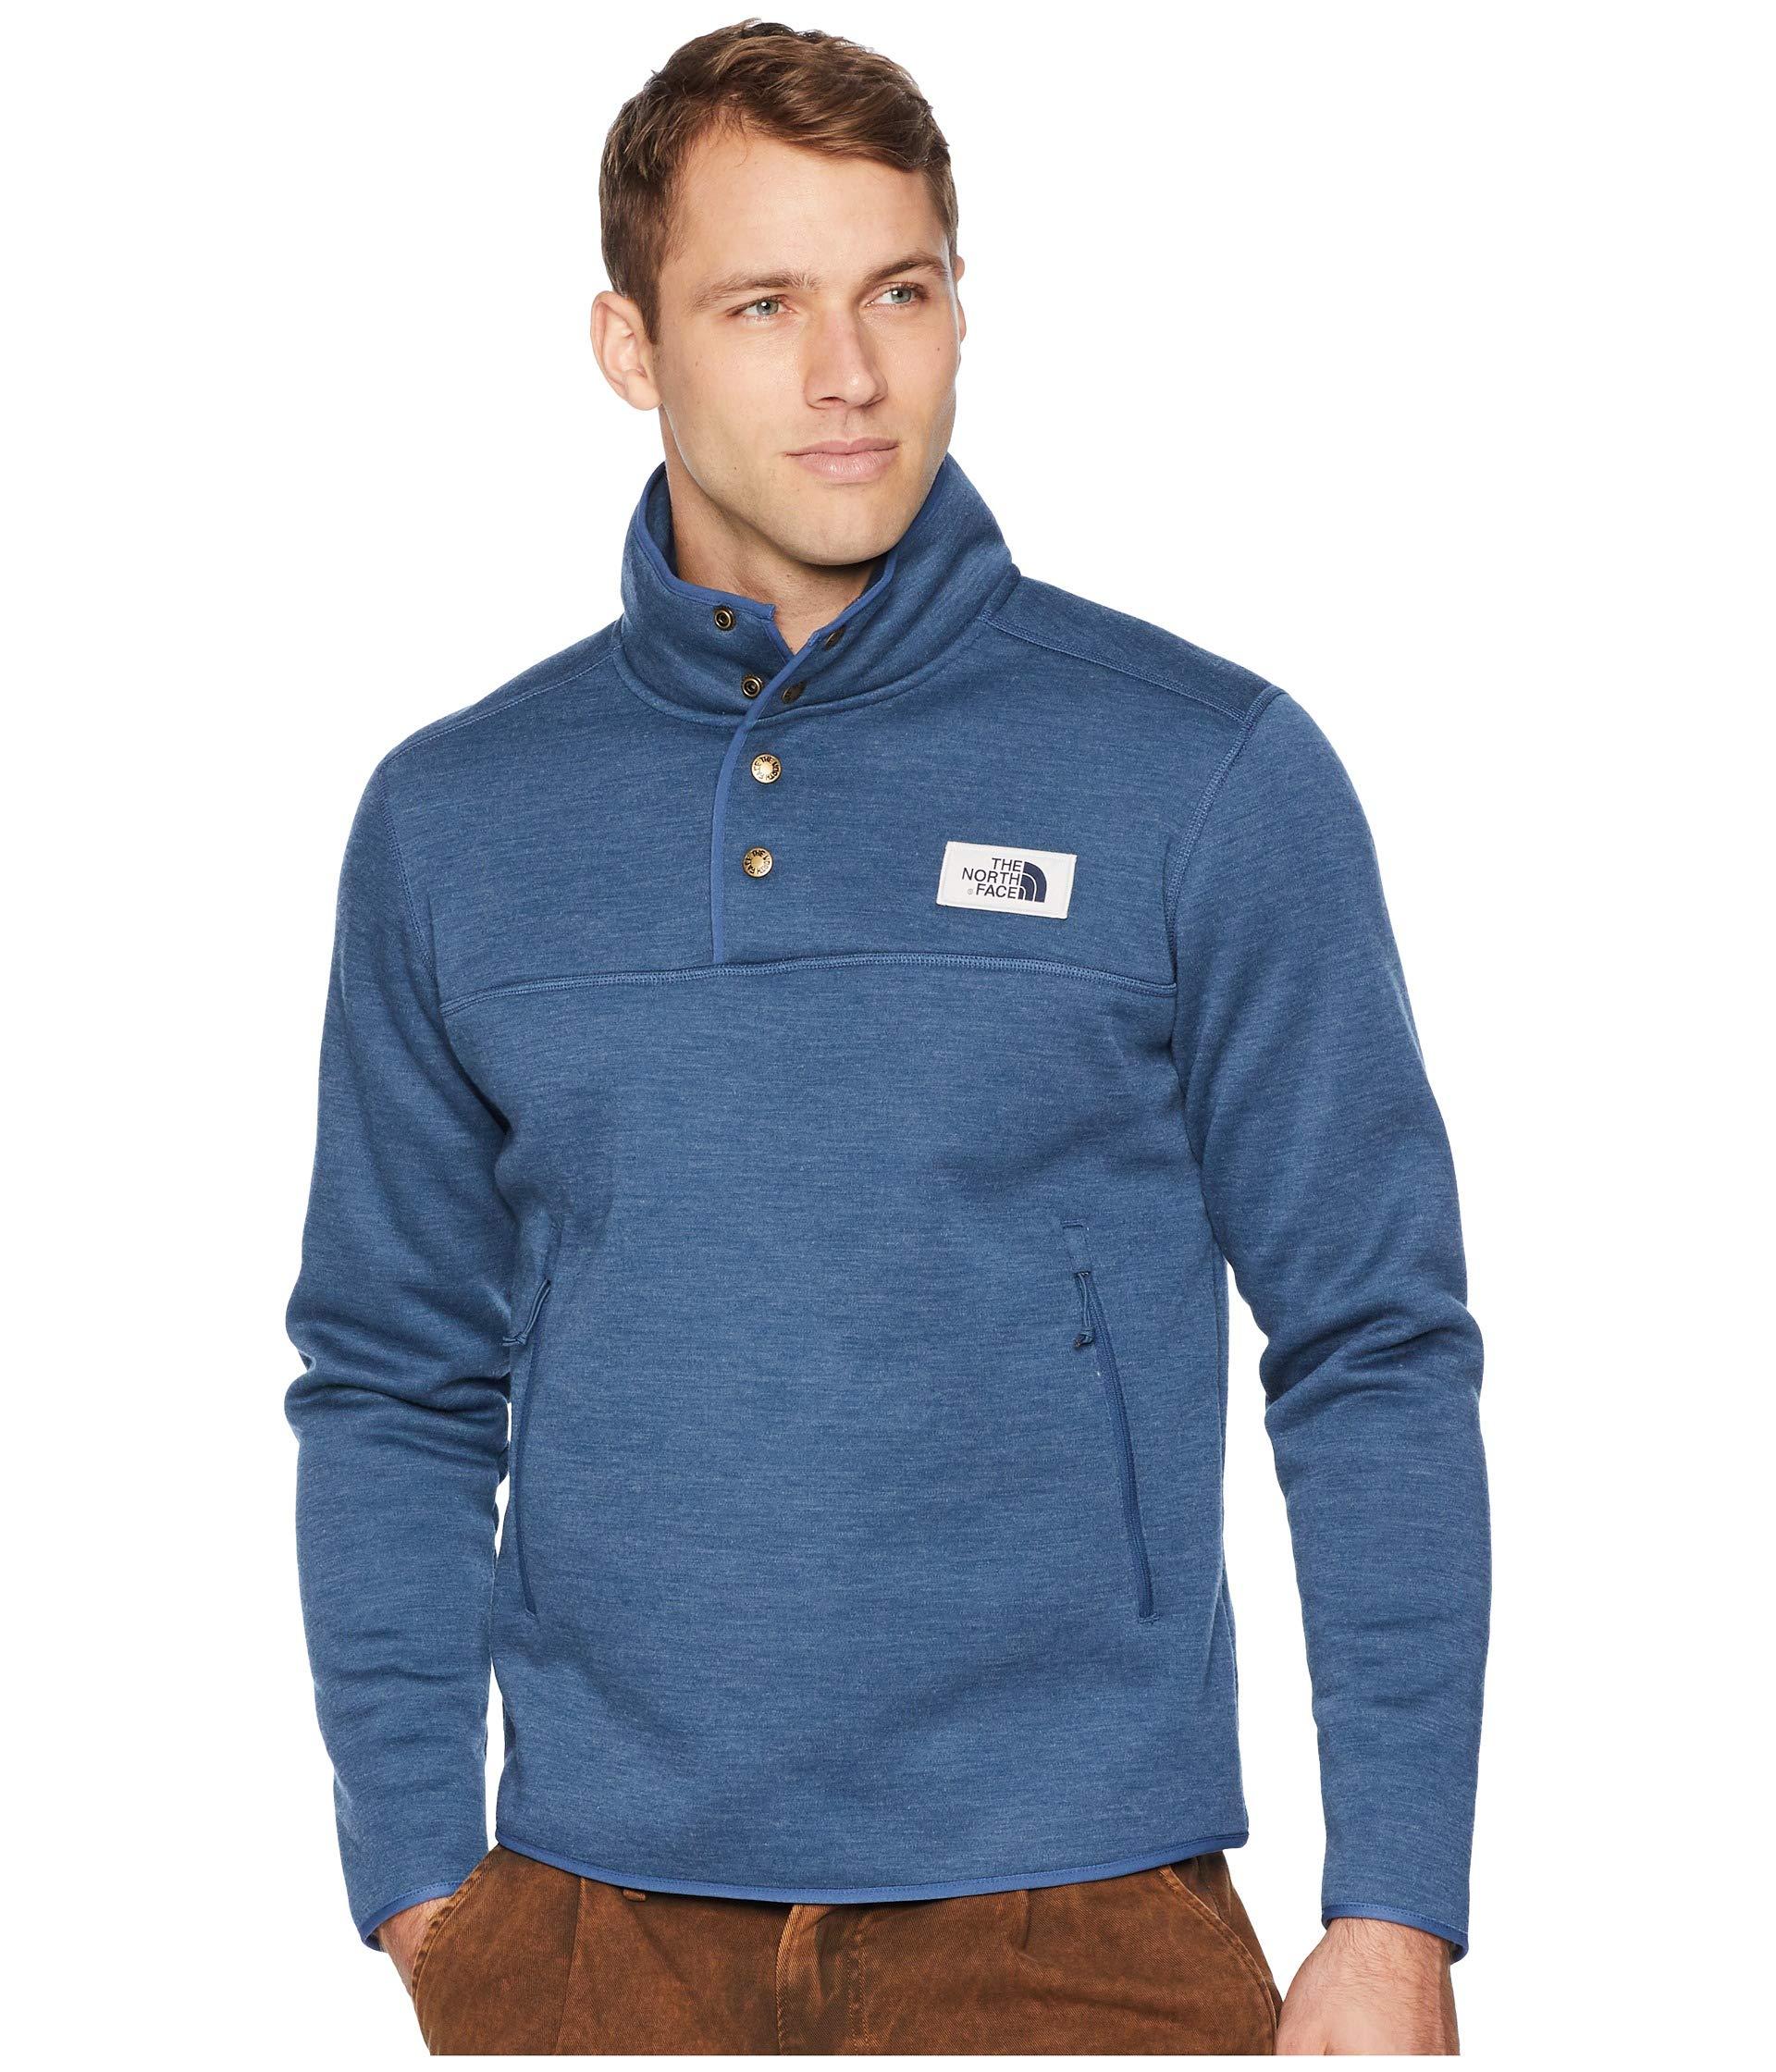 Lyst - The North Face Sherpa Patrol 1/4 Snap Pullover in Blue for Men